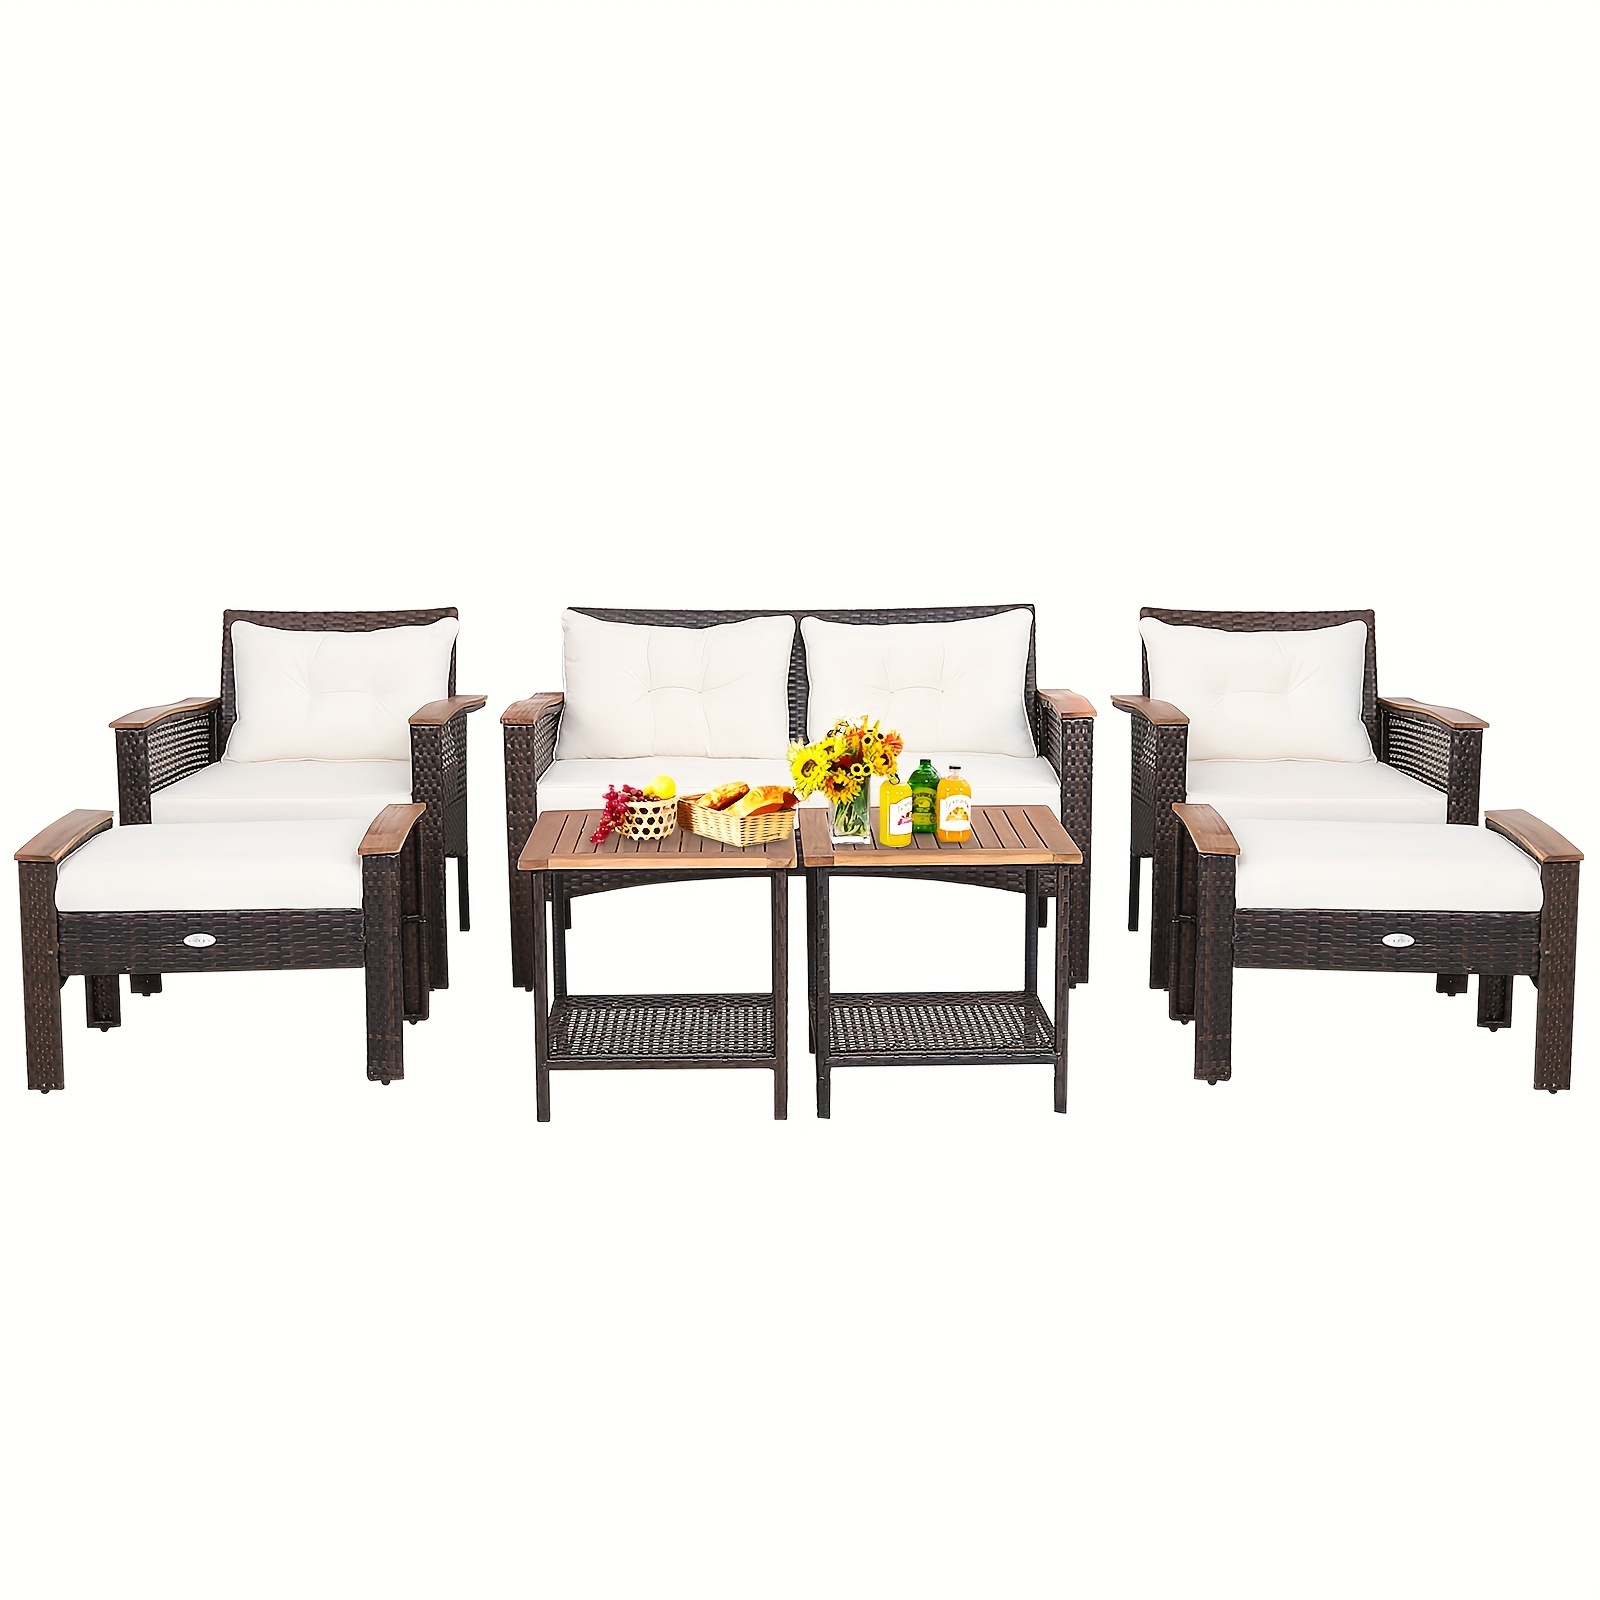 

7pcs/set Modern Patio Rattan Furniture Set, Cushioned Loveseat, Sofa, Ottoman, And Table With Sturdy Frame & Elegant Design For Outdoor Garden Deck